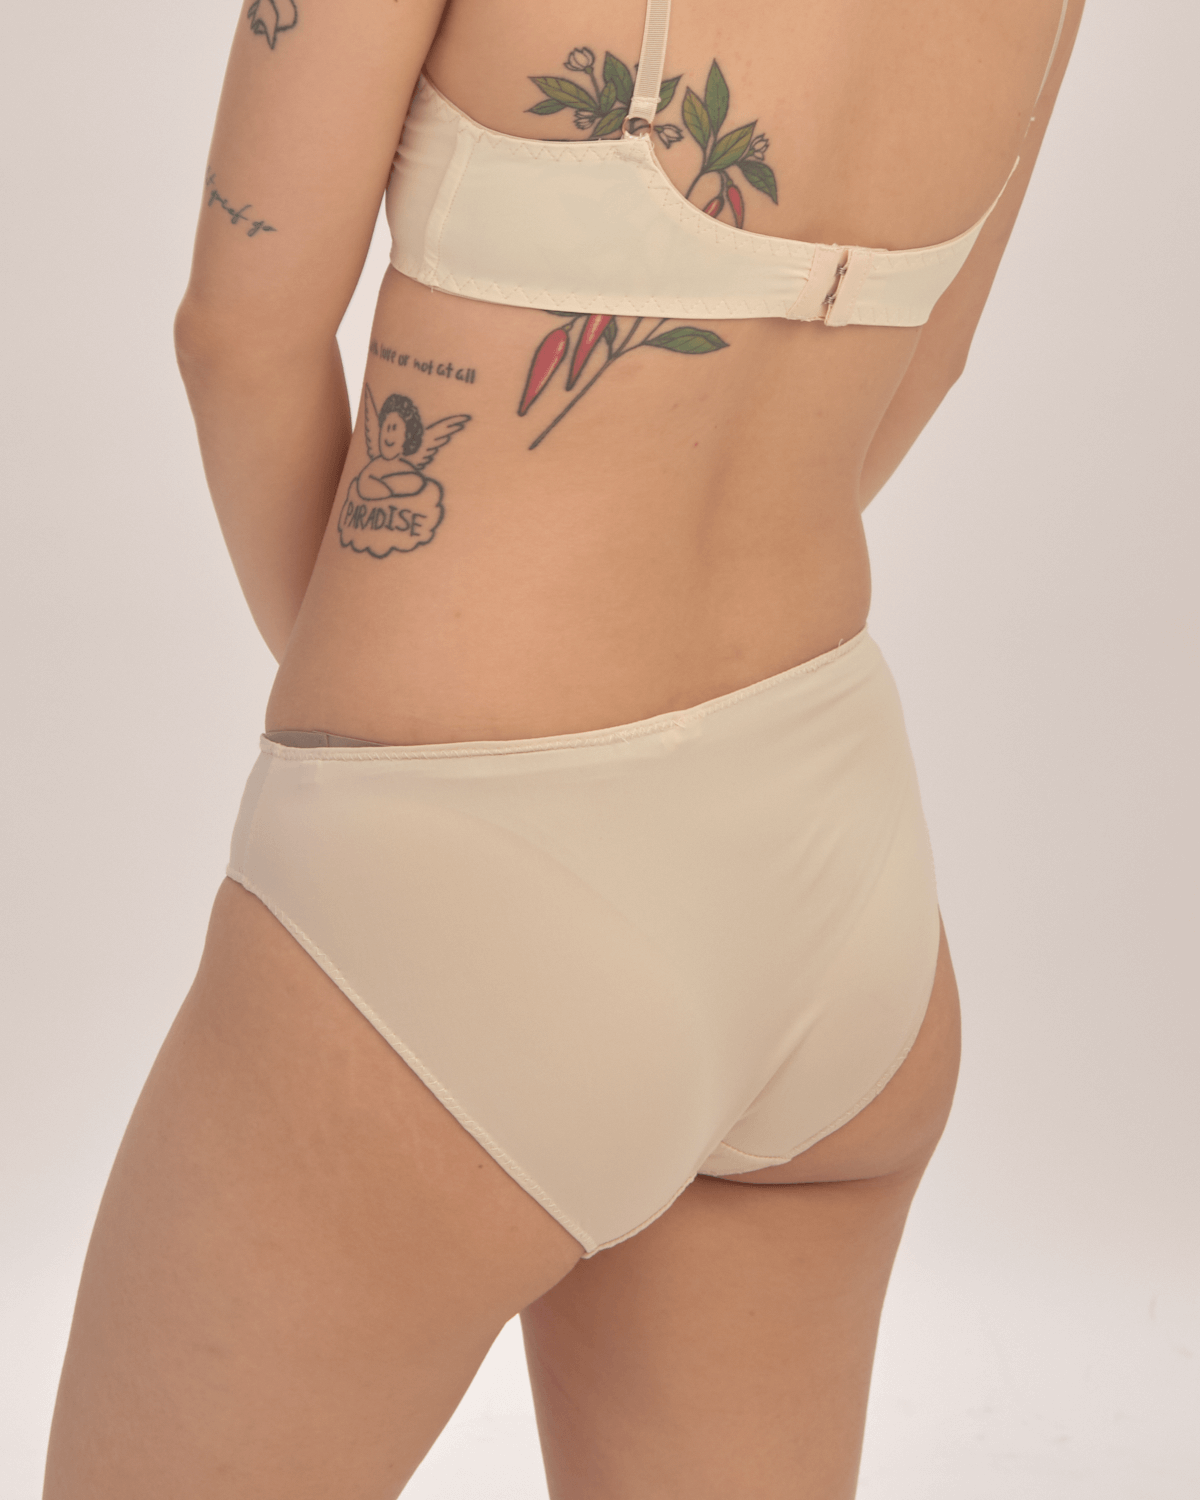 elevated basics panty in #14